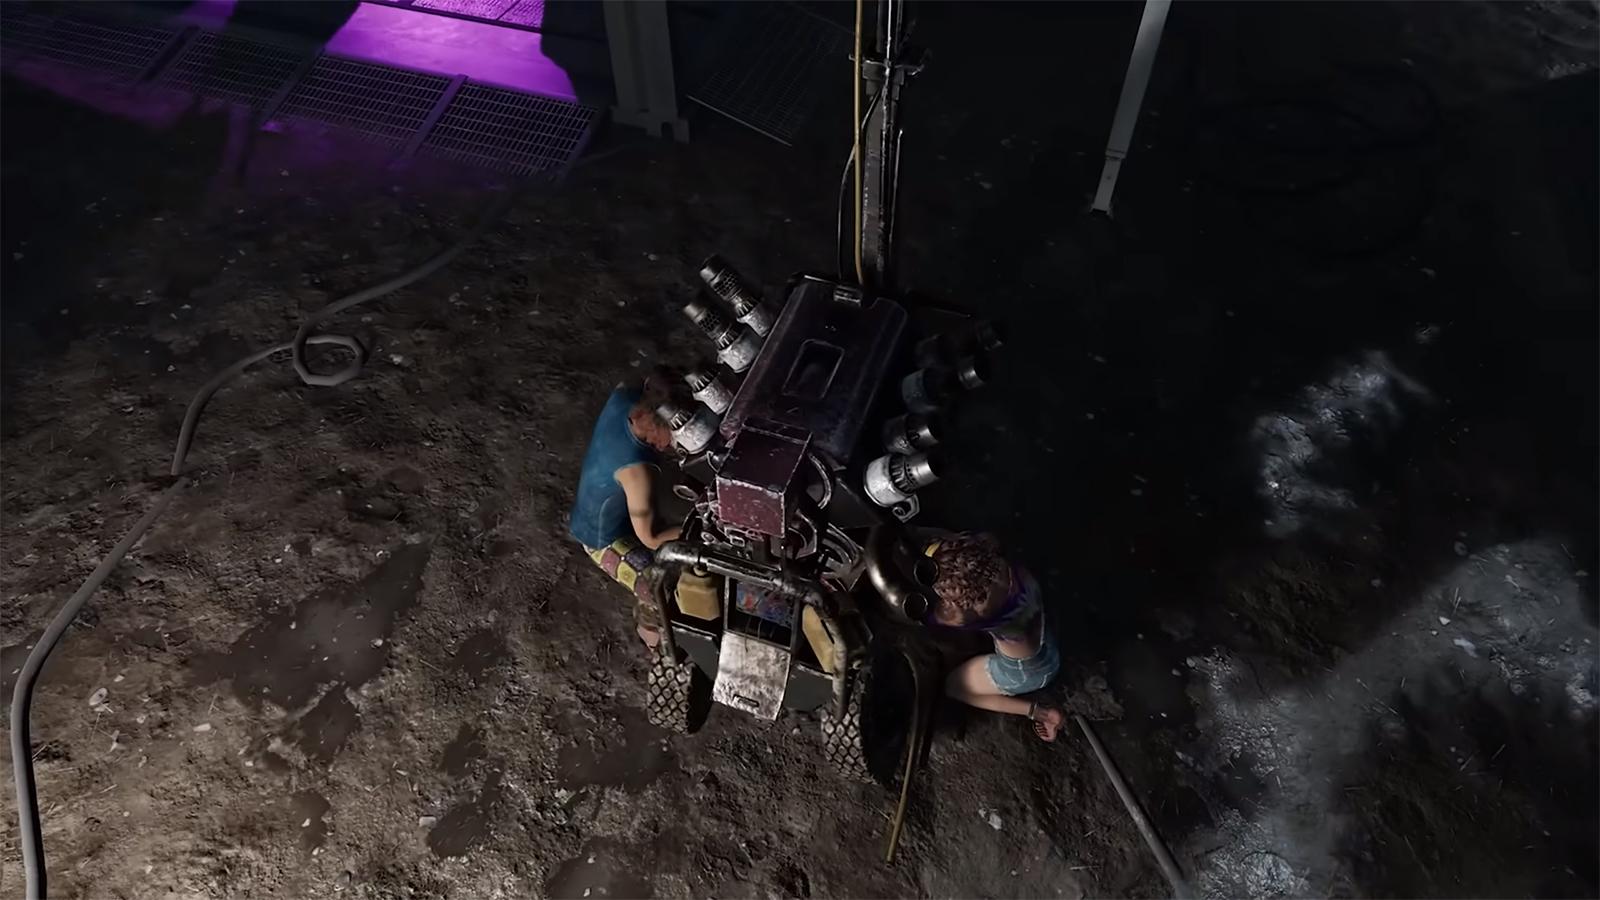 Renato and Thalita Lyra working on a generator in Dead by Daylight